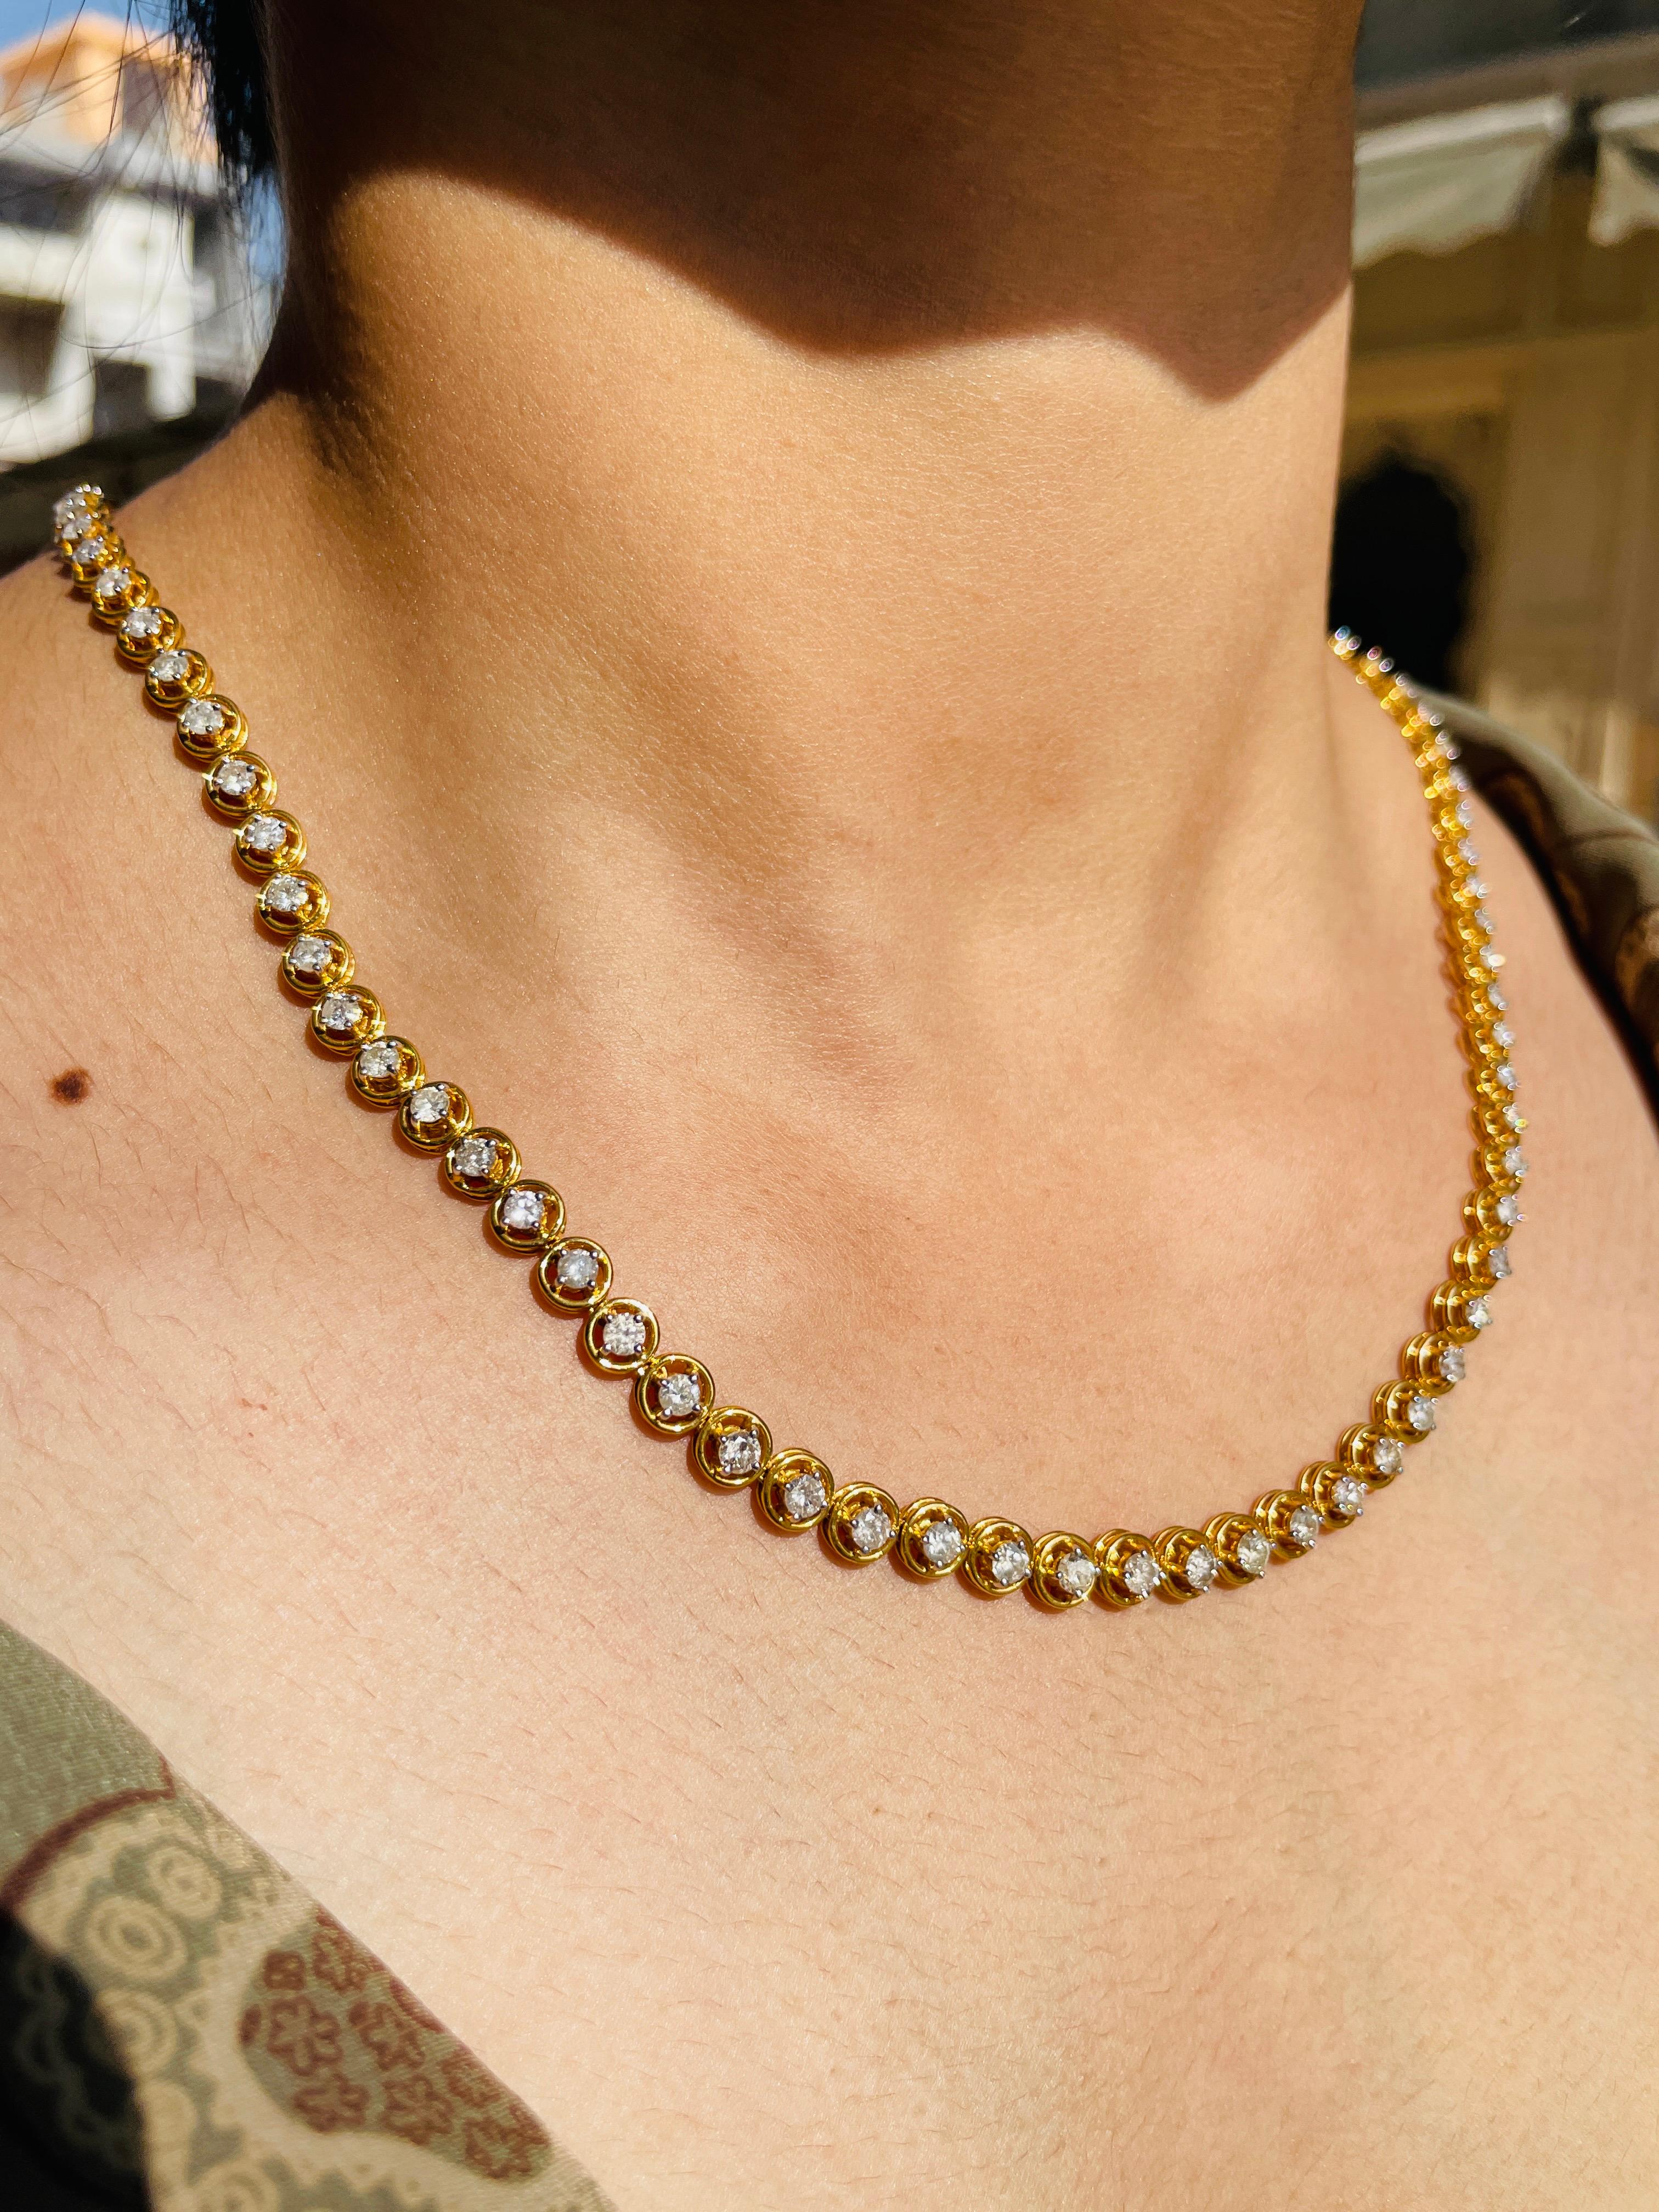 Modern Authentic 6.7 Carat Diamond Tennis Necklace in 18K Solid Yellow Gold For Sale